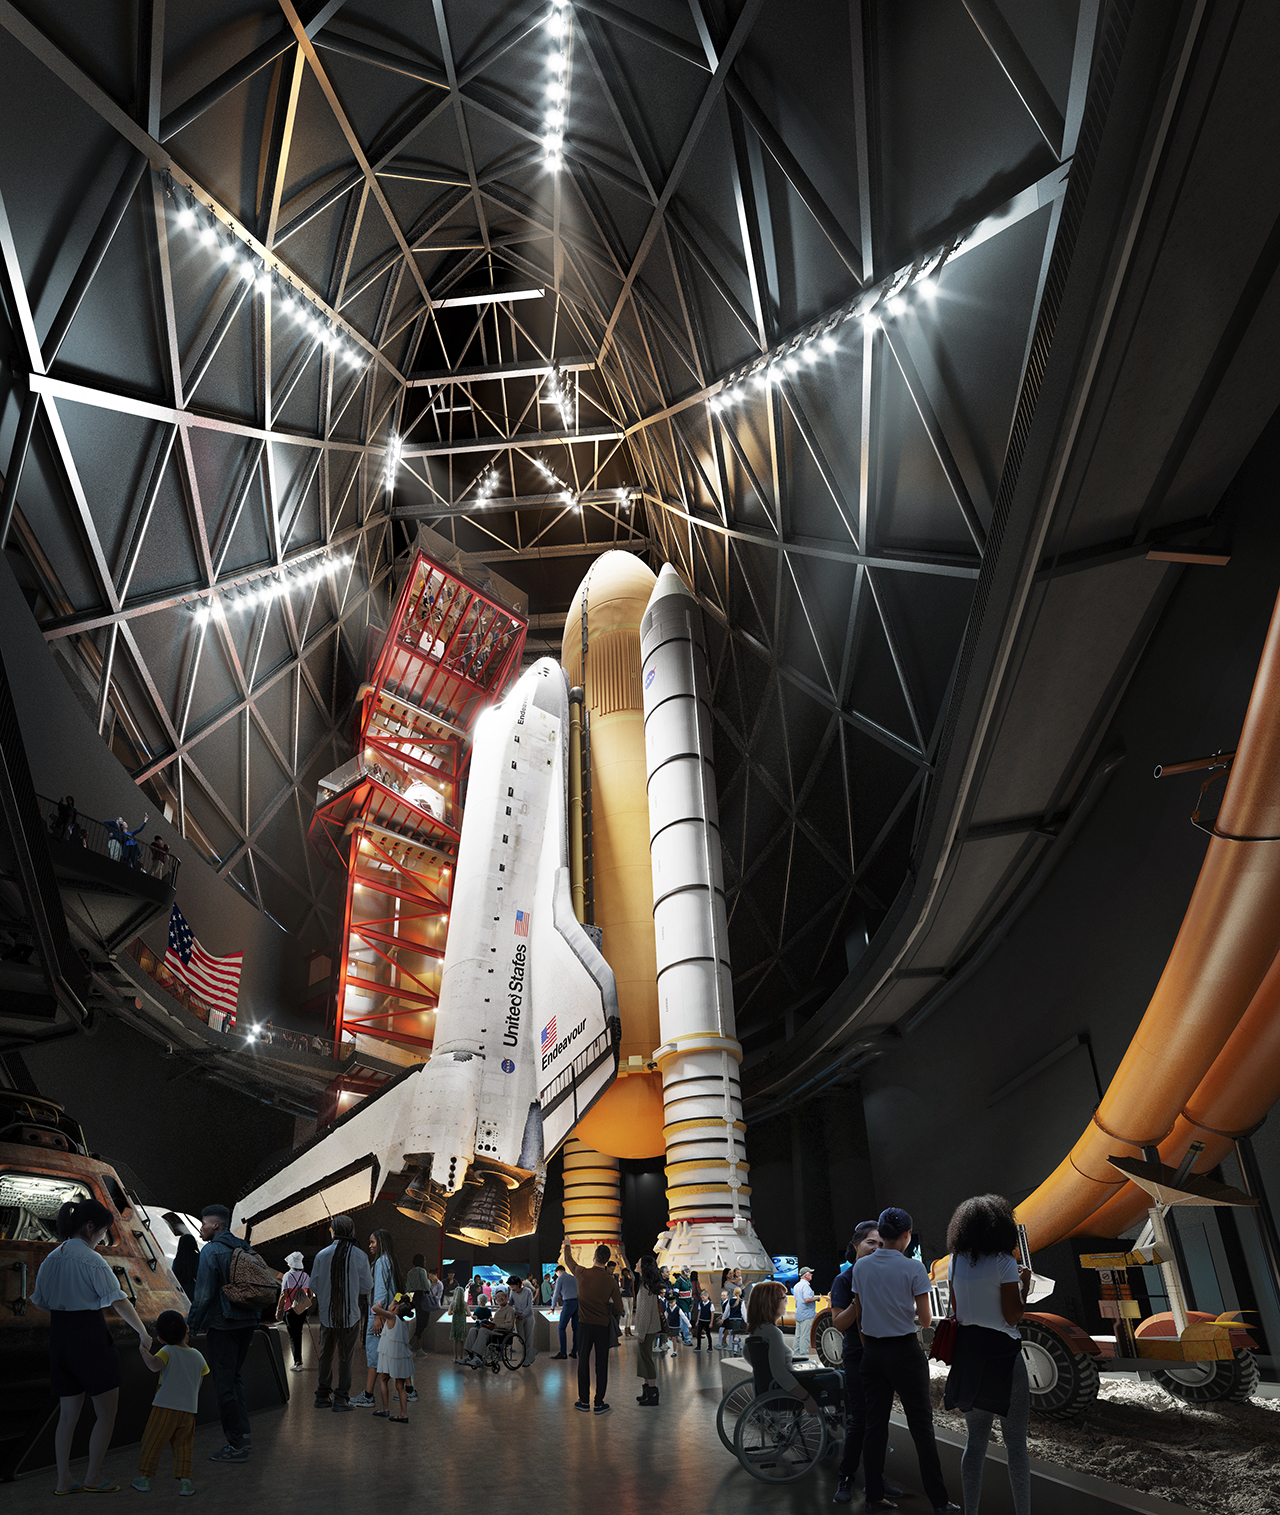 Artist's rendering of the space shuttle Endeavour, its two white solid rocket boosters and its huge orange fuel tank standing vertically in a museum display